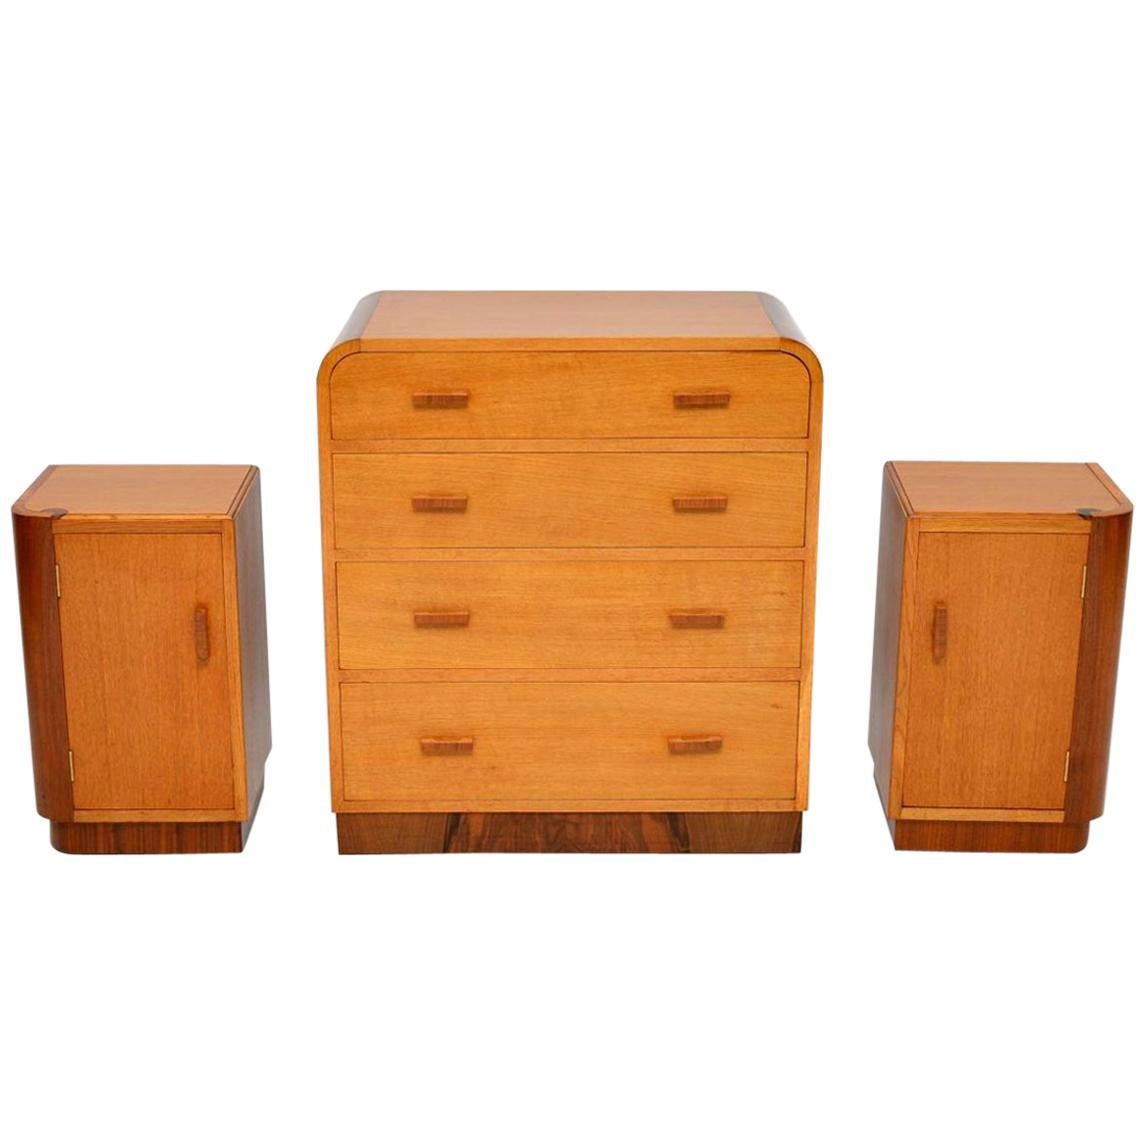 1950s Oak and Walnut Chest of Drawers or Bedside Cabinets by E. Gomme